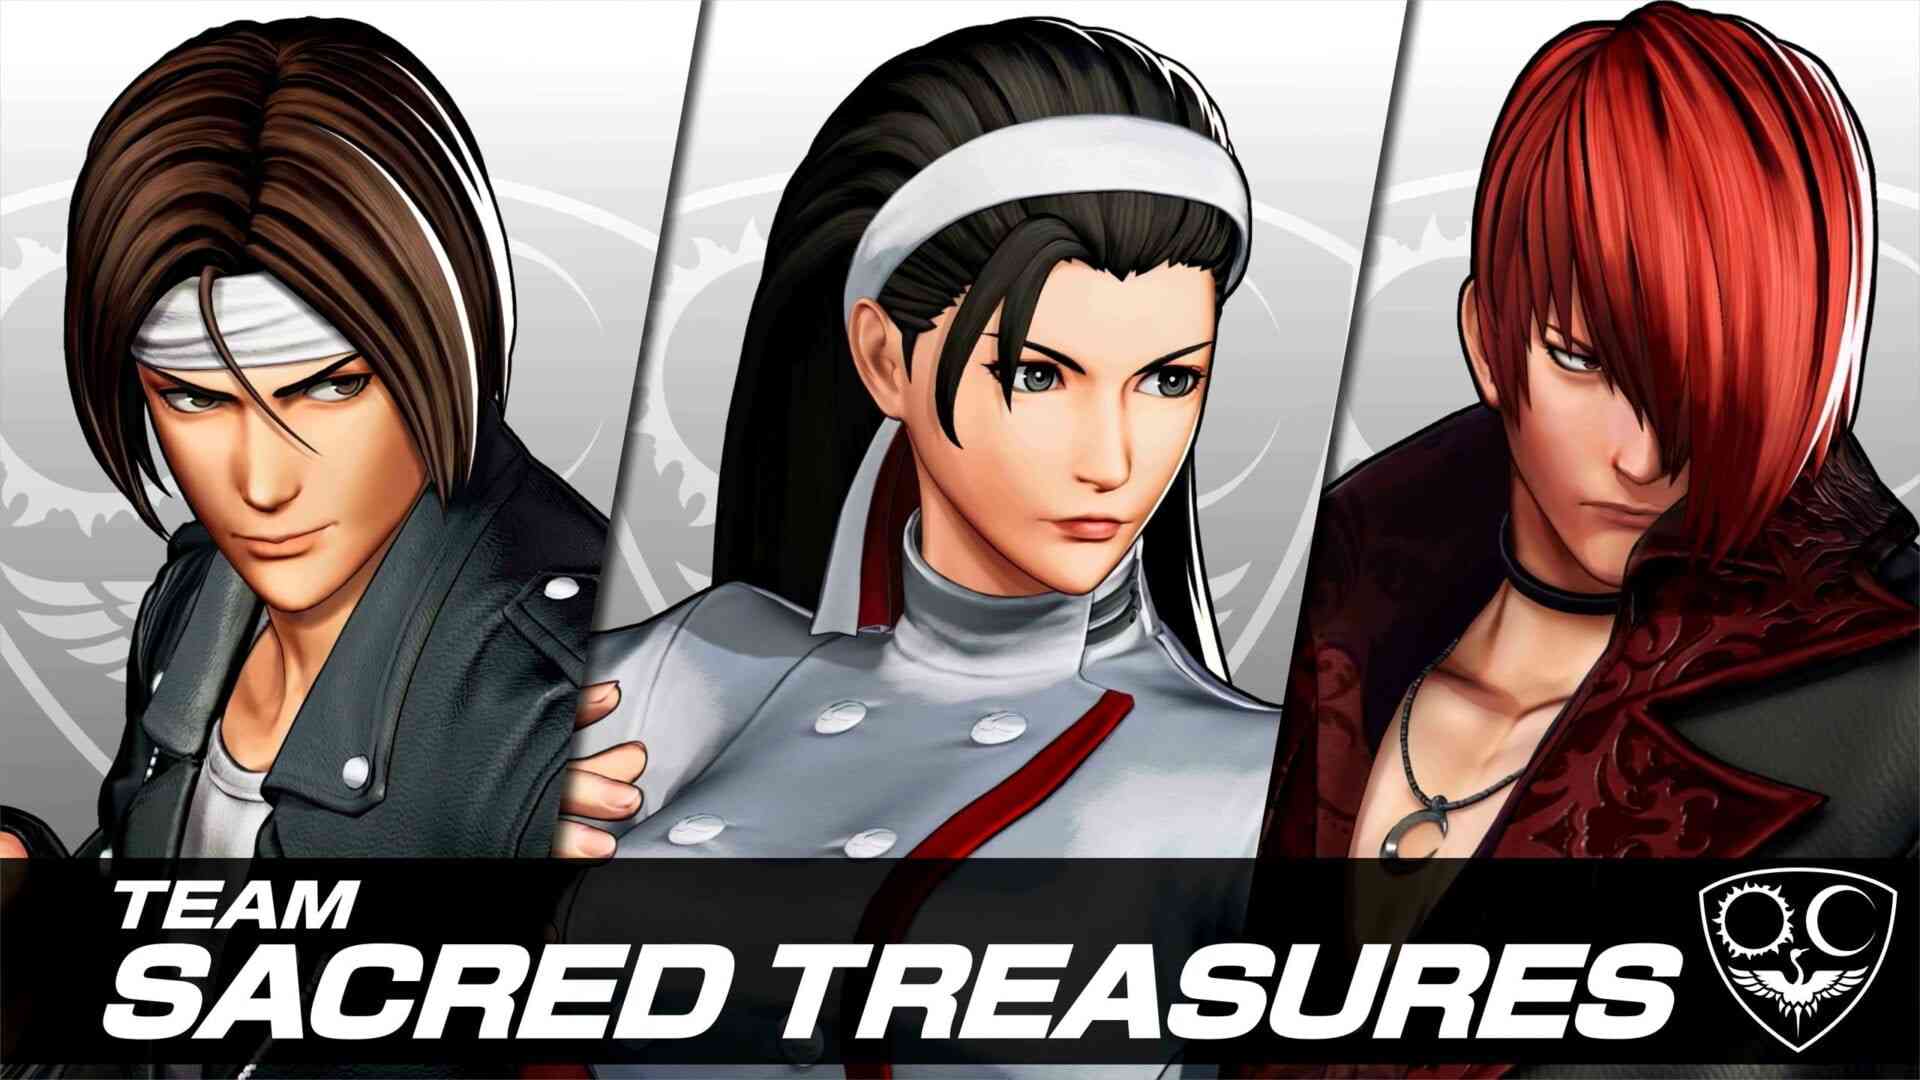 King of Fighters XV Adds Iori Yagami With Latest Character Trailer